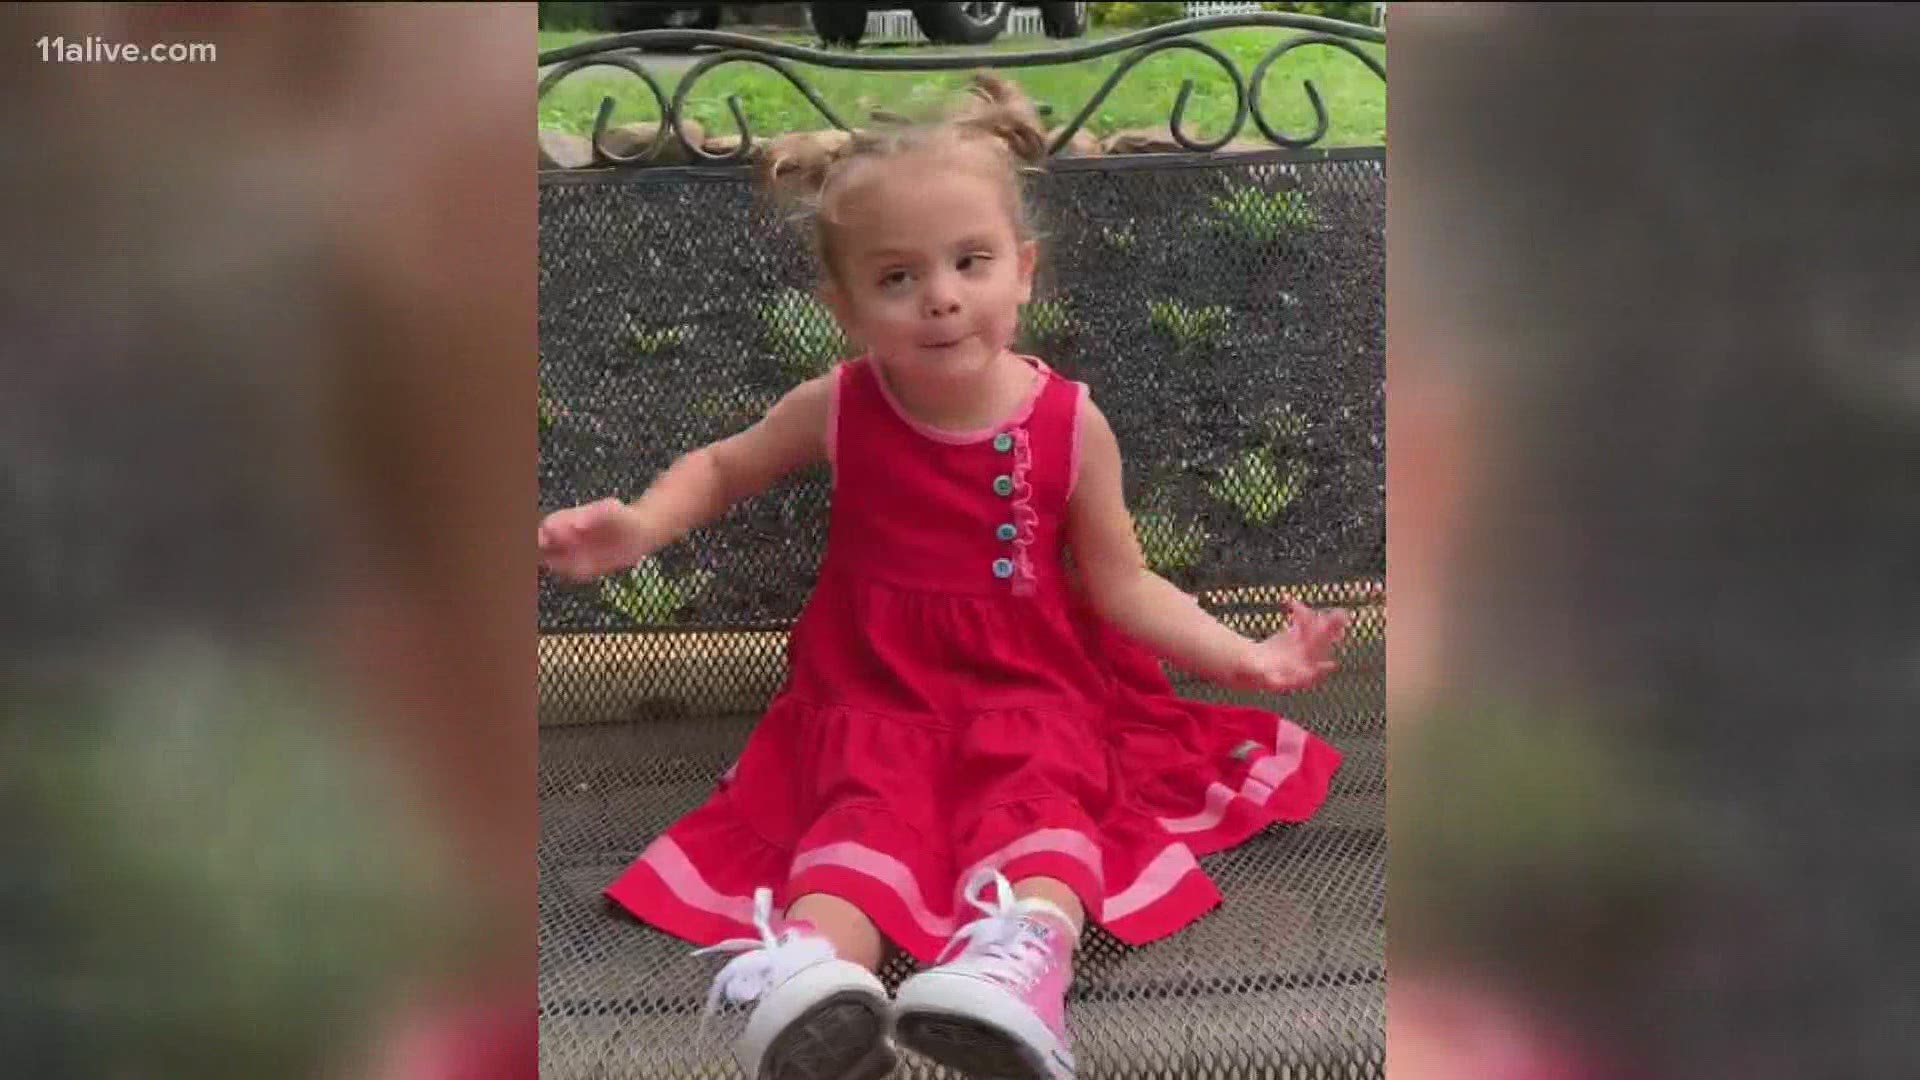 Brooklyn Grace has a way to make any day a little brighter. She sent a video message that made our day.